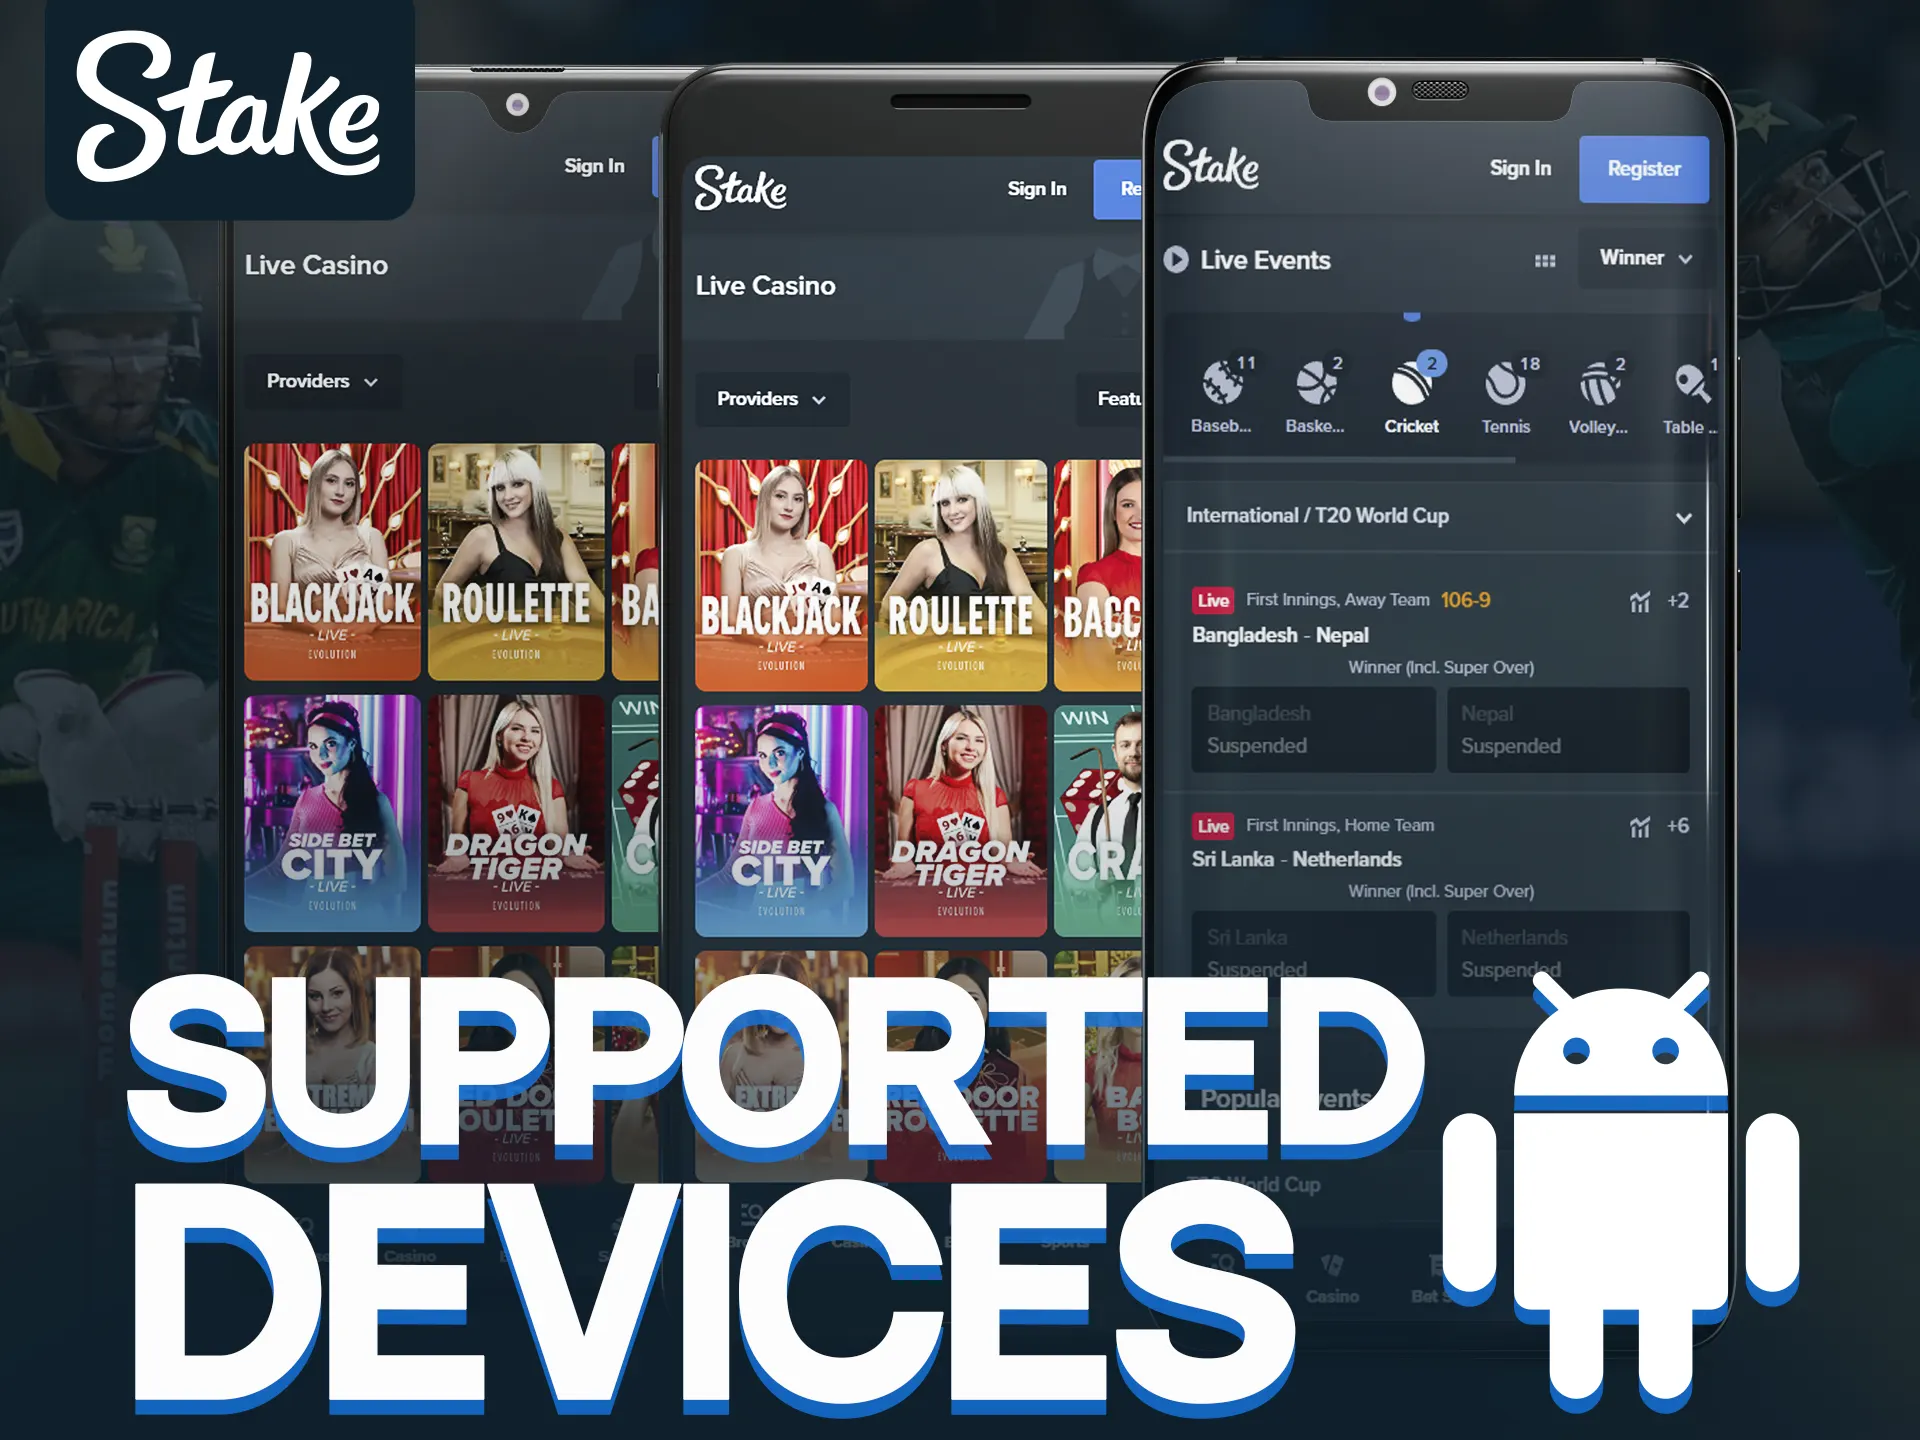 Stake works smoothly on popular Android devices.